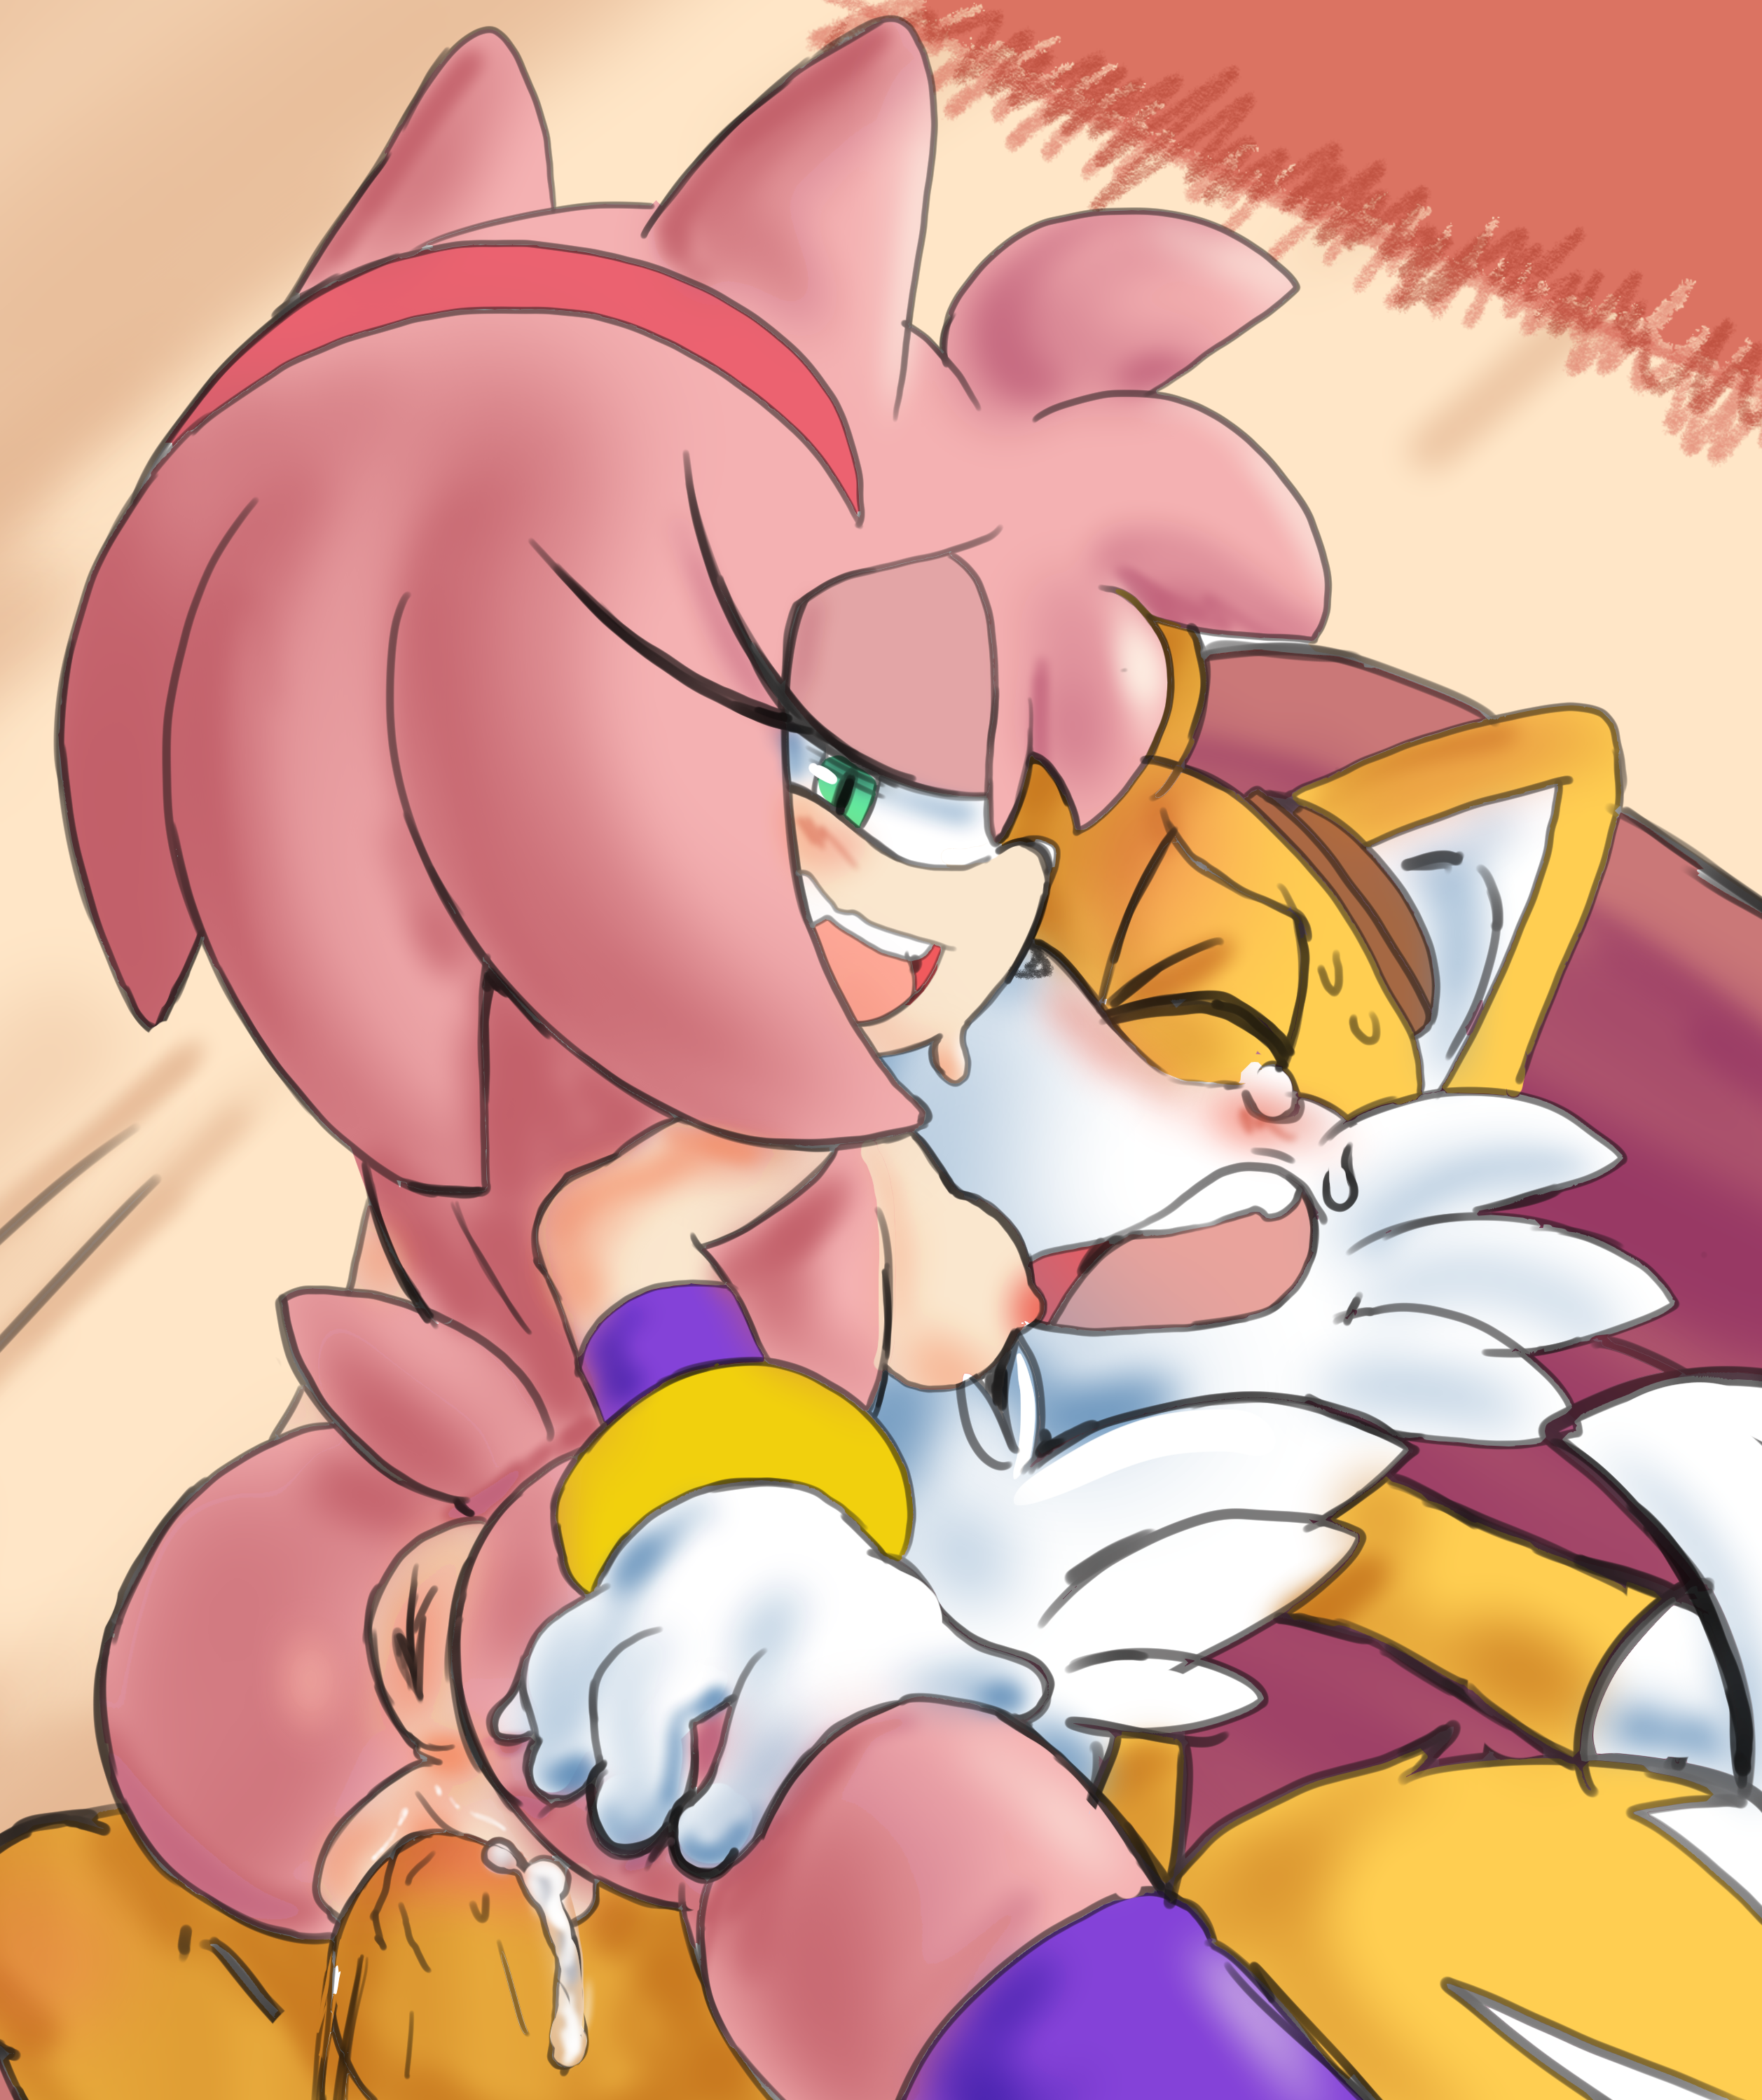 Amy rose x tails porn